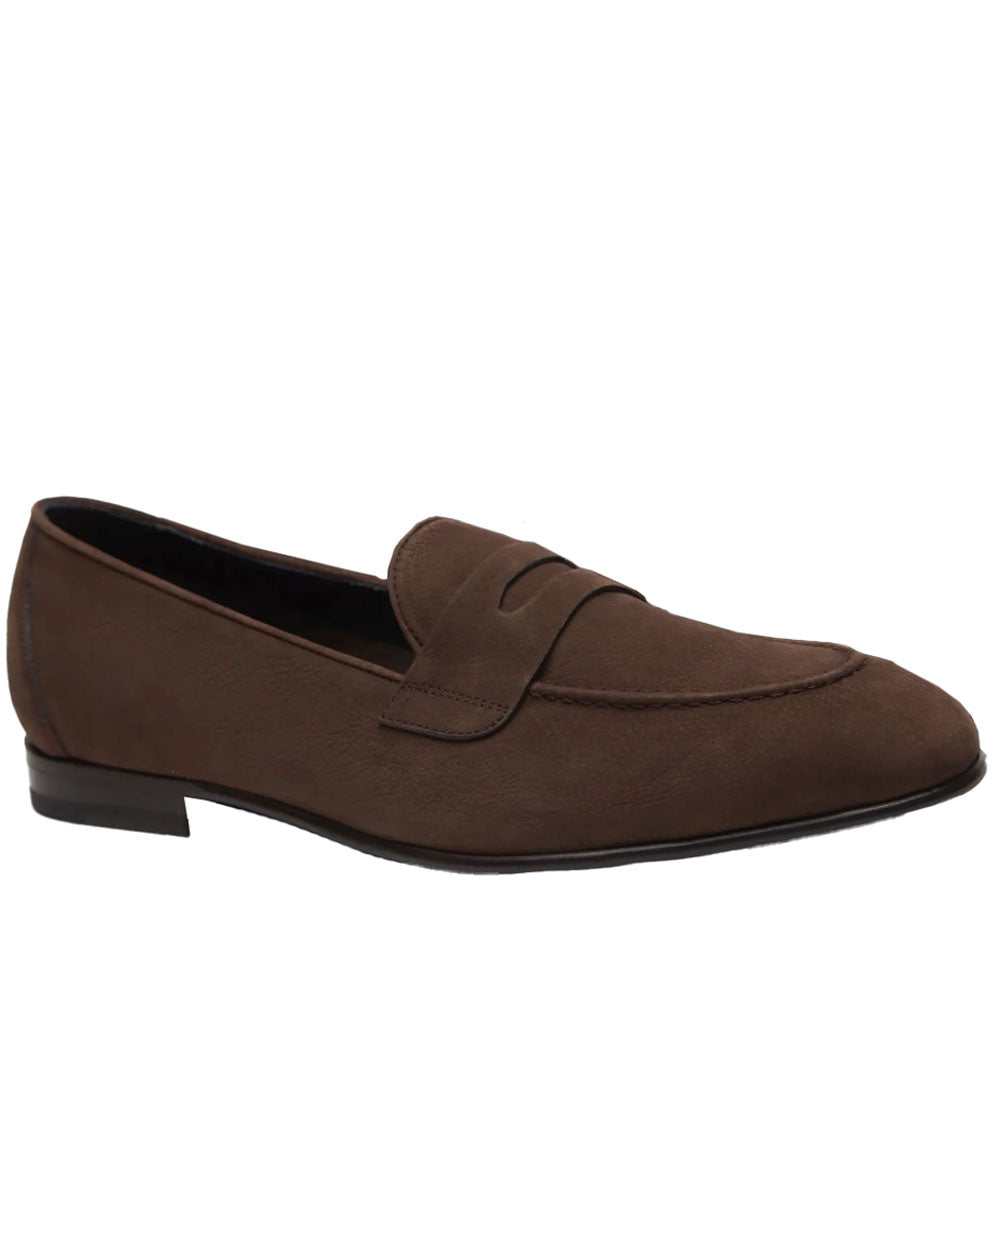 Nabuk Casual Penny Loafer in Coffee